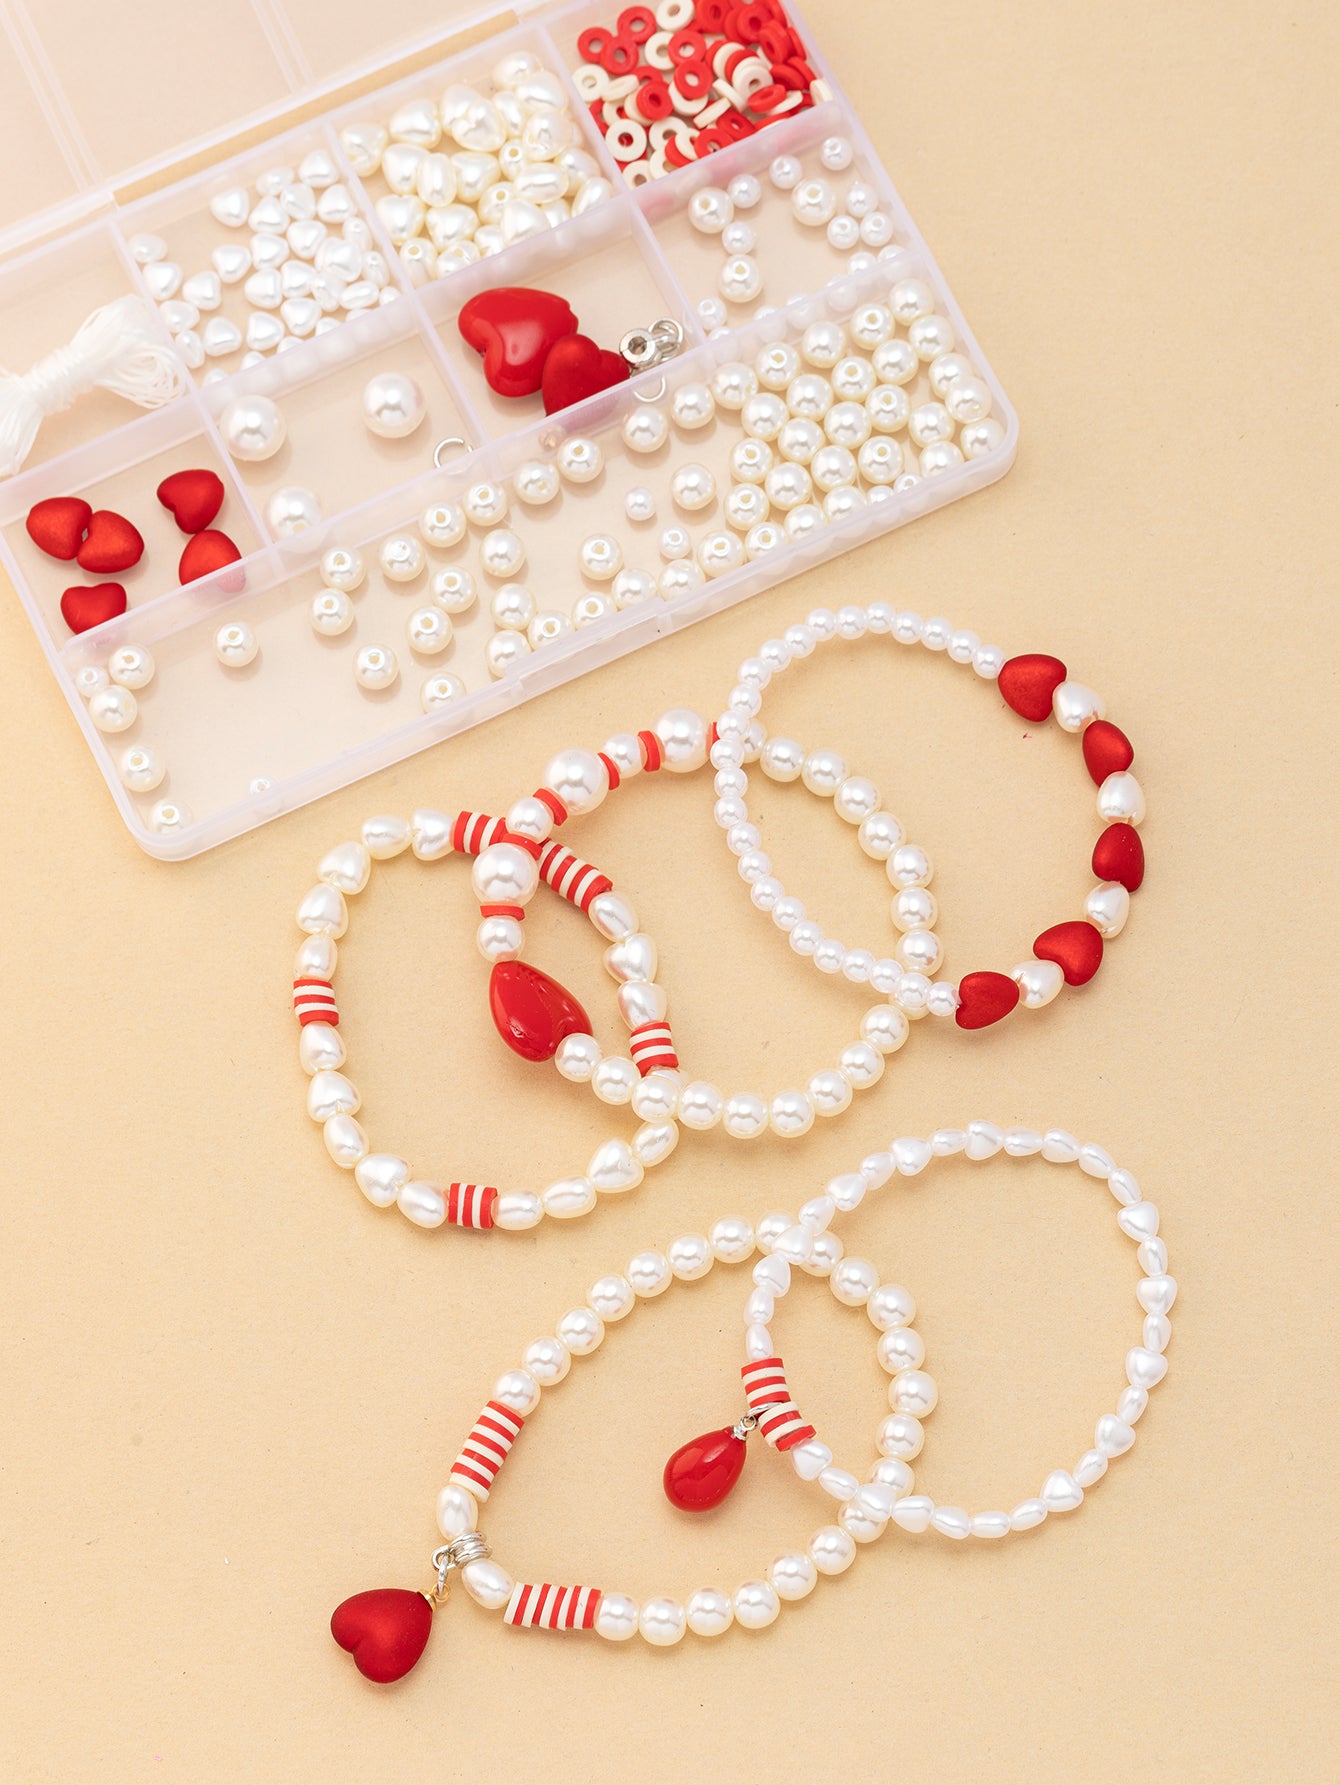 DIY boxed straight hole imitation pearl AB color diy handmade beaded loose bead material can be made finished necklace bracelet accessories